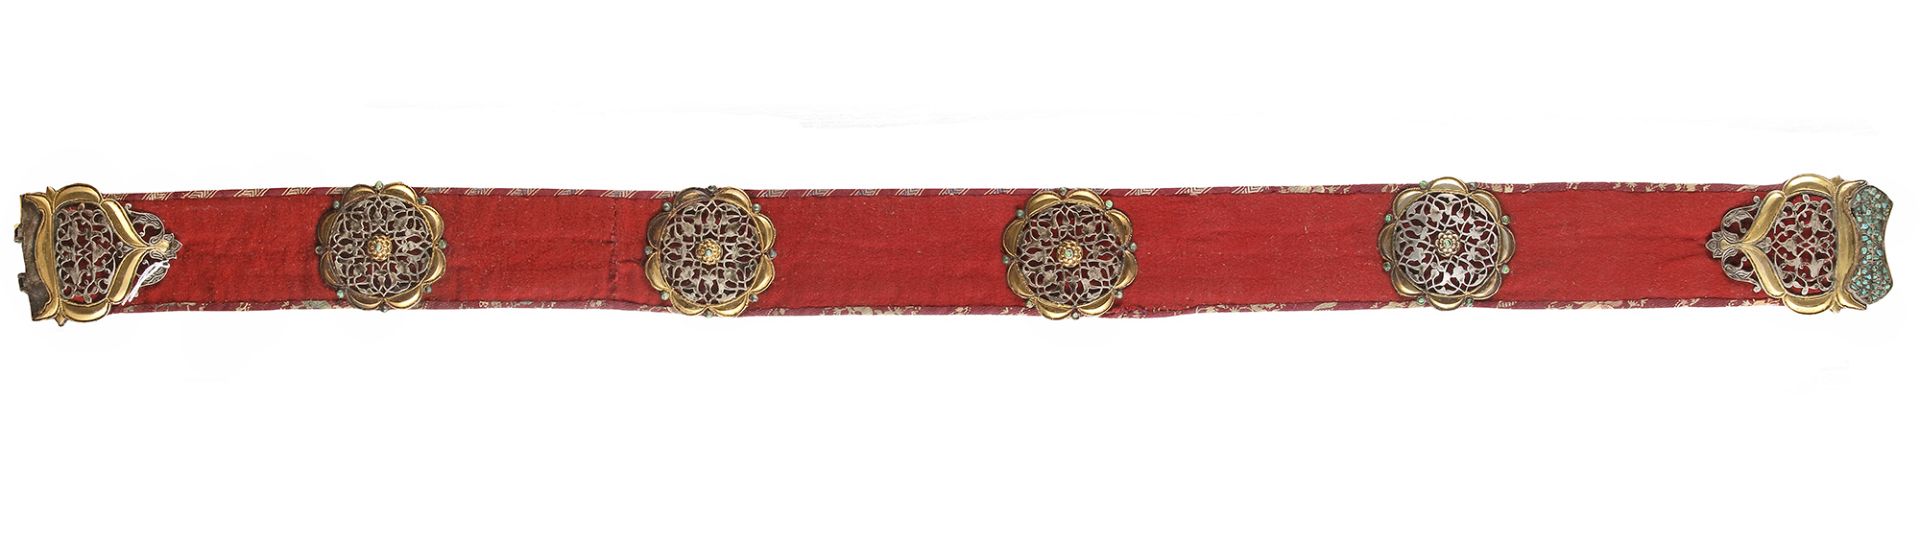 A BOKHARA TURQUOISE-INLAID SILVER-GILT MOUNTED BELT, CENTRAL ASIA, LATE 19TH CENTURY